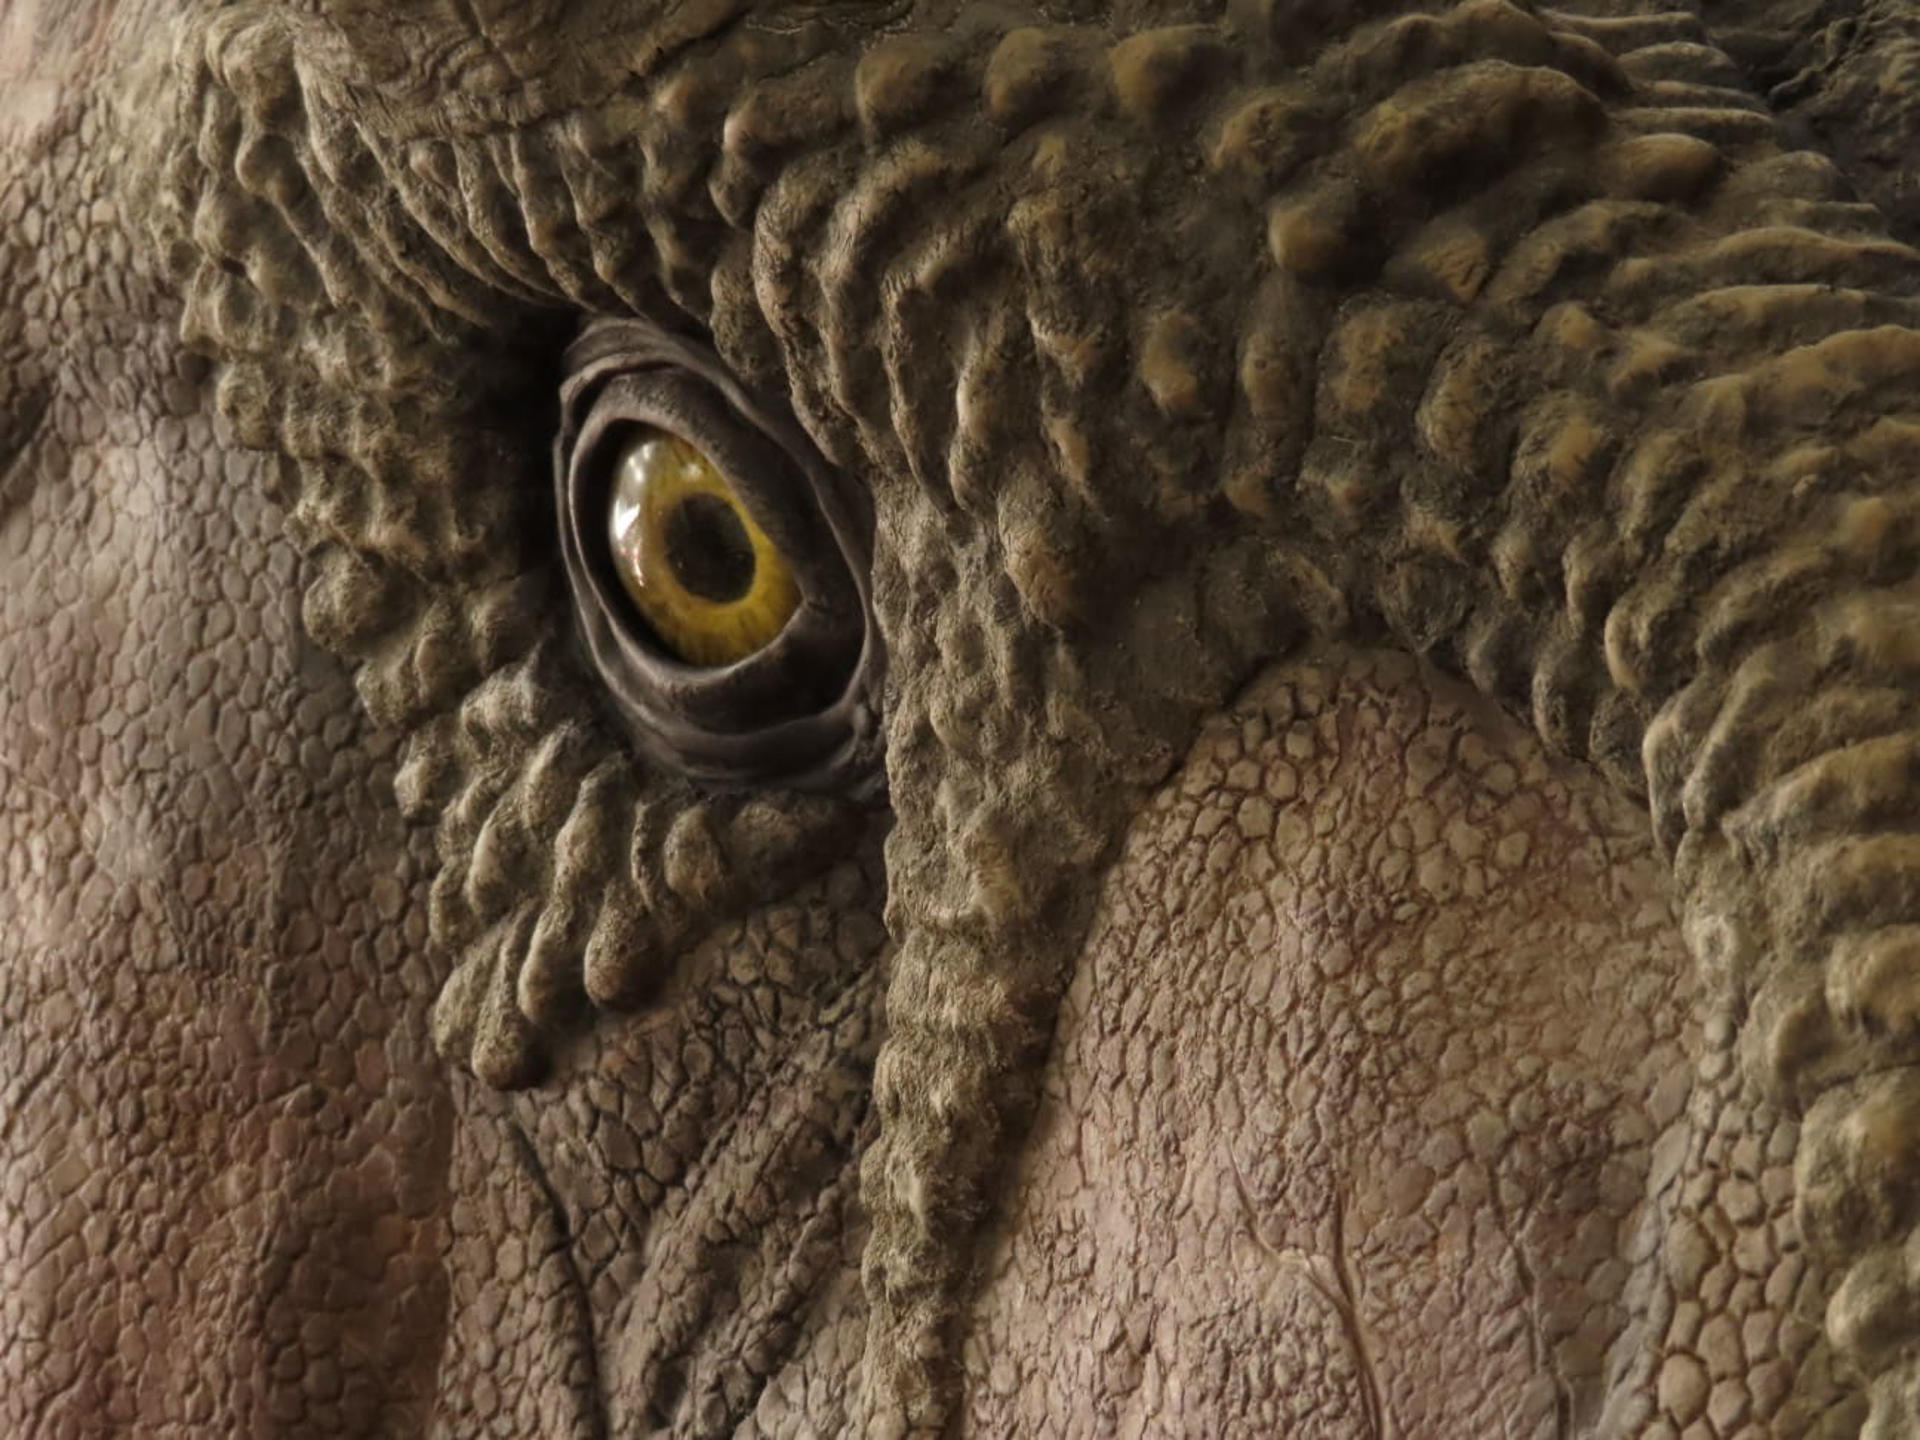 Photo of an eye of a Carnotaurus, the only horned carnivorous dinosaur from the Southern Hemisphere, on display at the Queensland Museum as part of the Patagonian Dinosaurs Exhibition EFE/Handout Queensland Museum EDITORIAL USE ONLY/ONLY AVAILABLE TO ILLUSTRATE THE ACCOMPANYING NEWS (MANDATORY CREDIT)